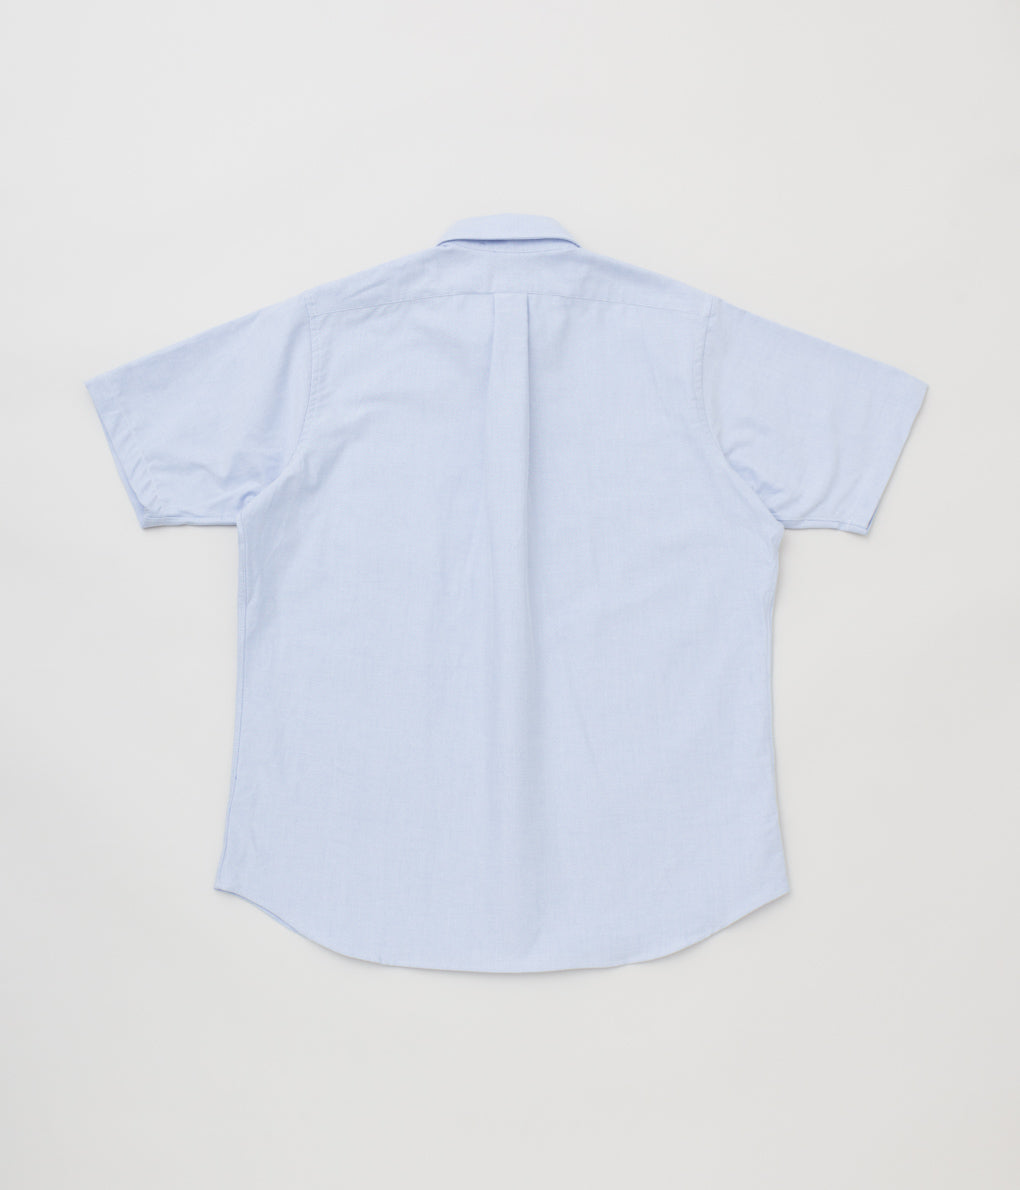 INDIVIDUALIZED SHIRTS "CAMBRIDGE OXFORD (NEW STANDARD FIT POP OVER SHORT SLEEVE SHIRT)" (LIGHT BLUE)